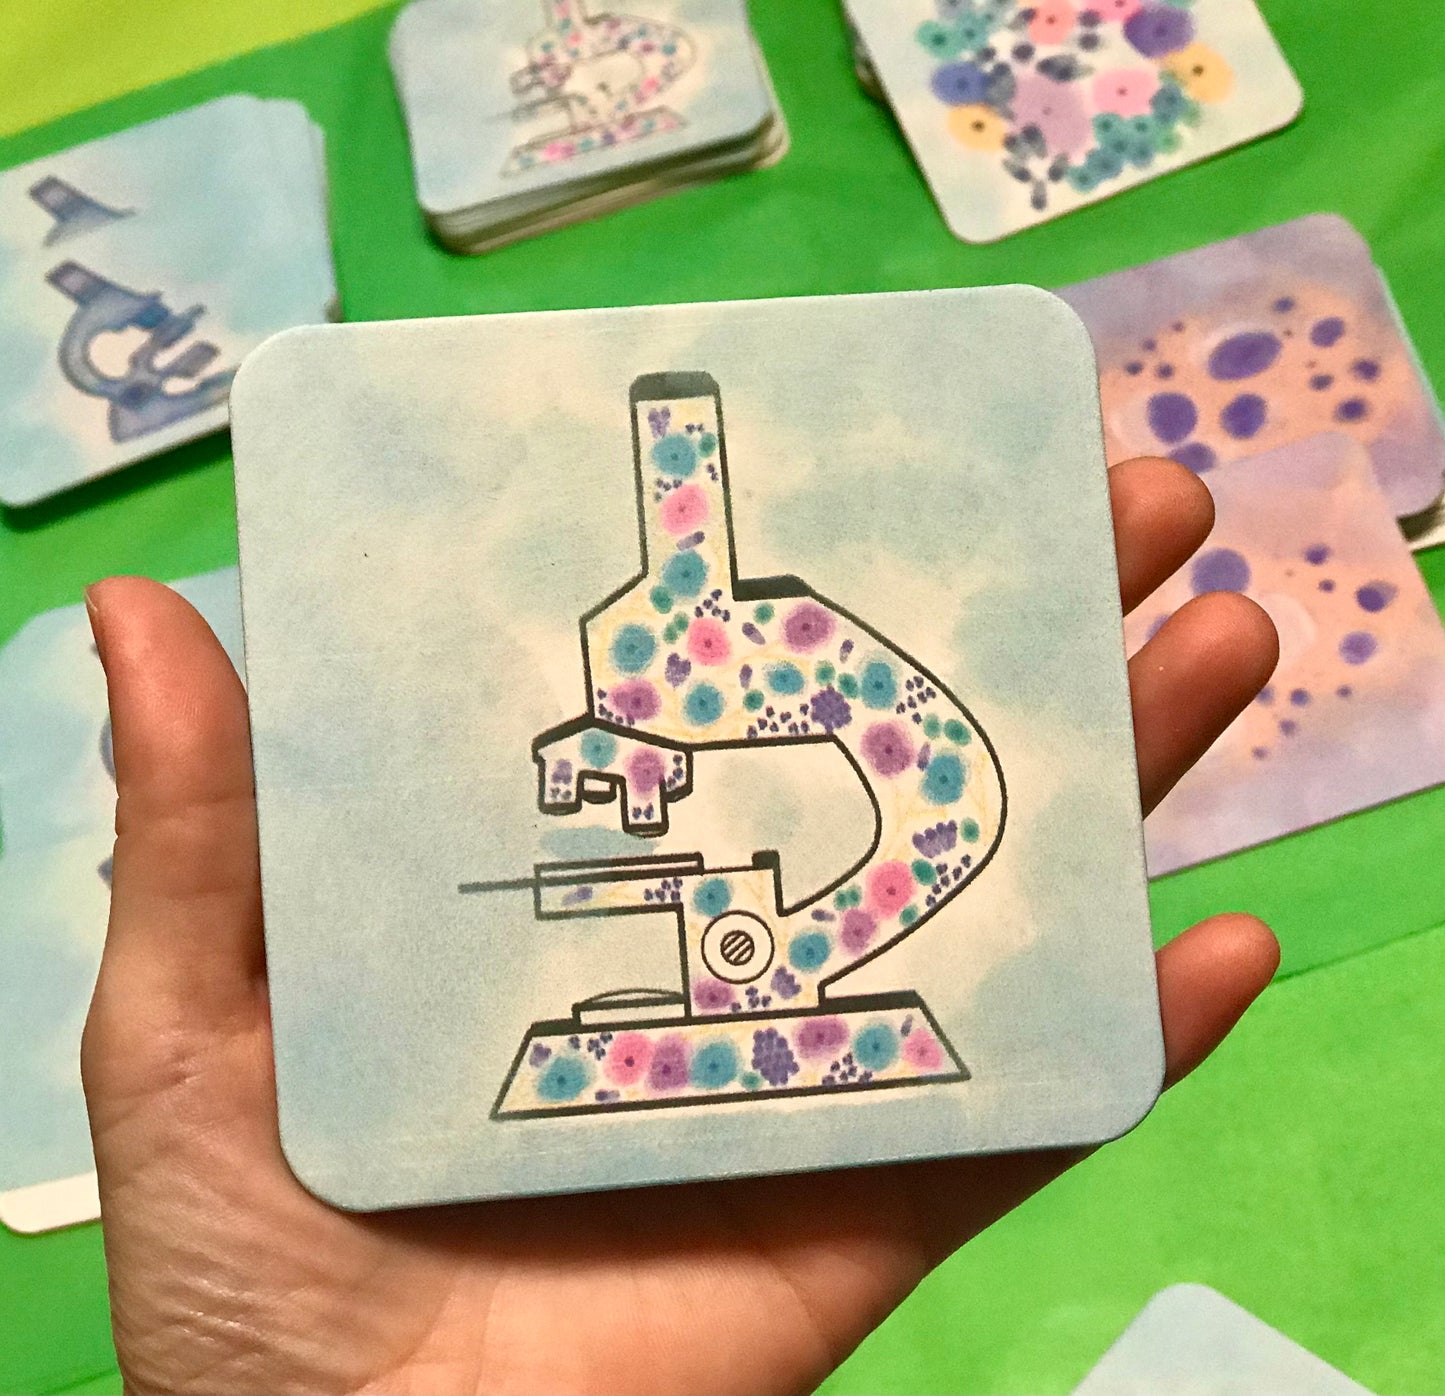 Coaster set- Cytologist, Adenocarcinoma and colorful cells